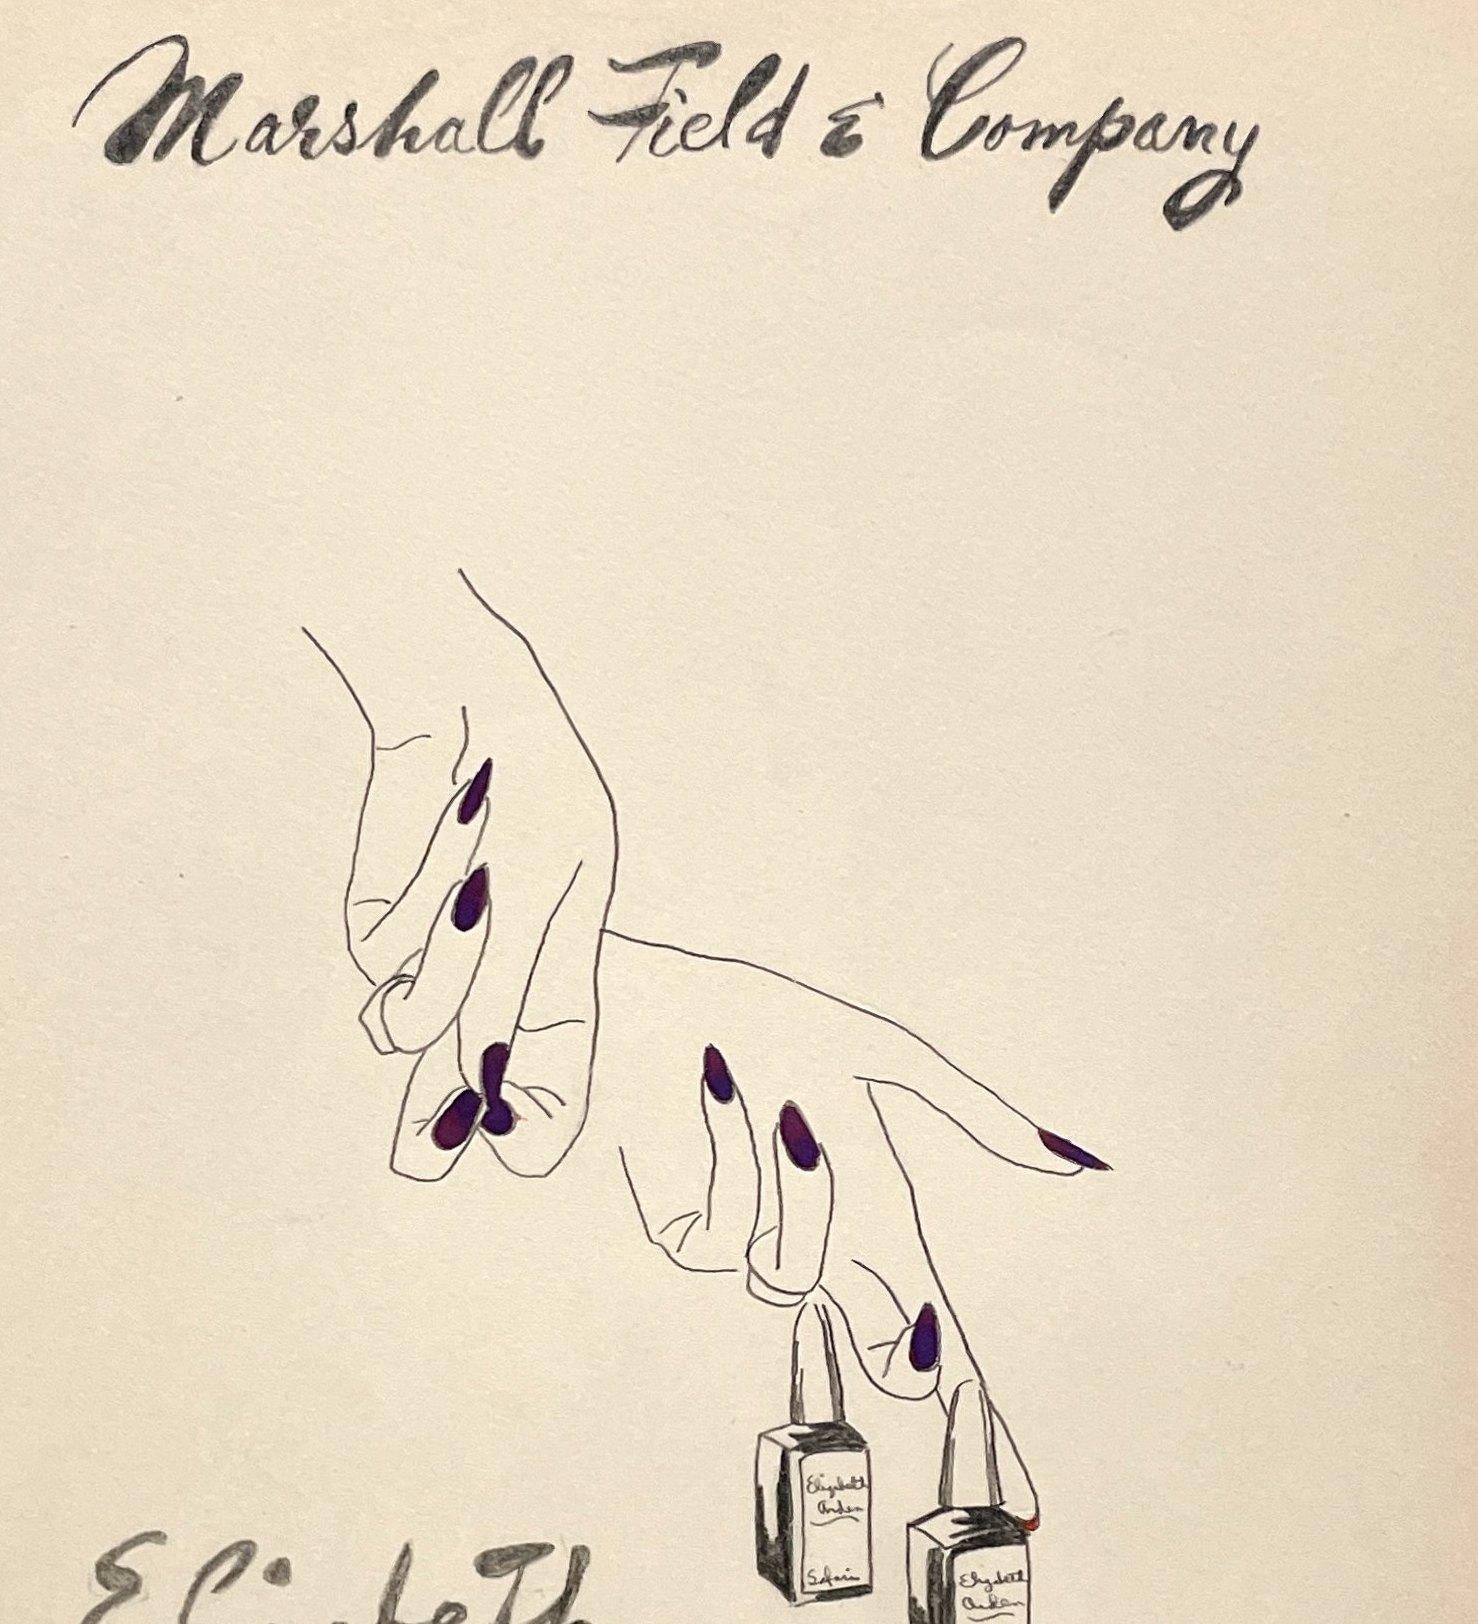 Early 1940s Fashion Study for Elizabeth Arden's Nail Polish at Marshall Field - Art by Unknown